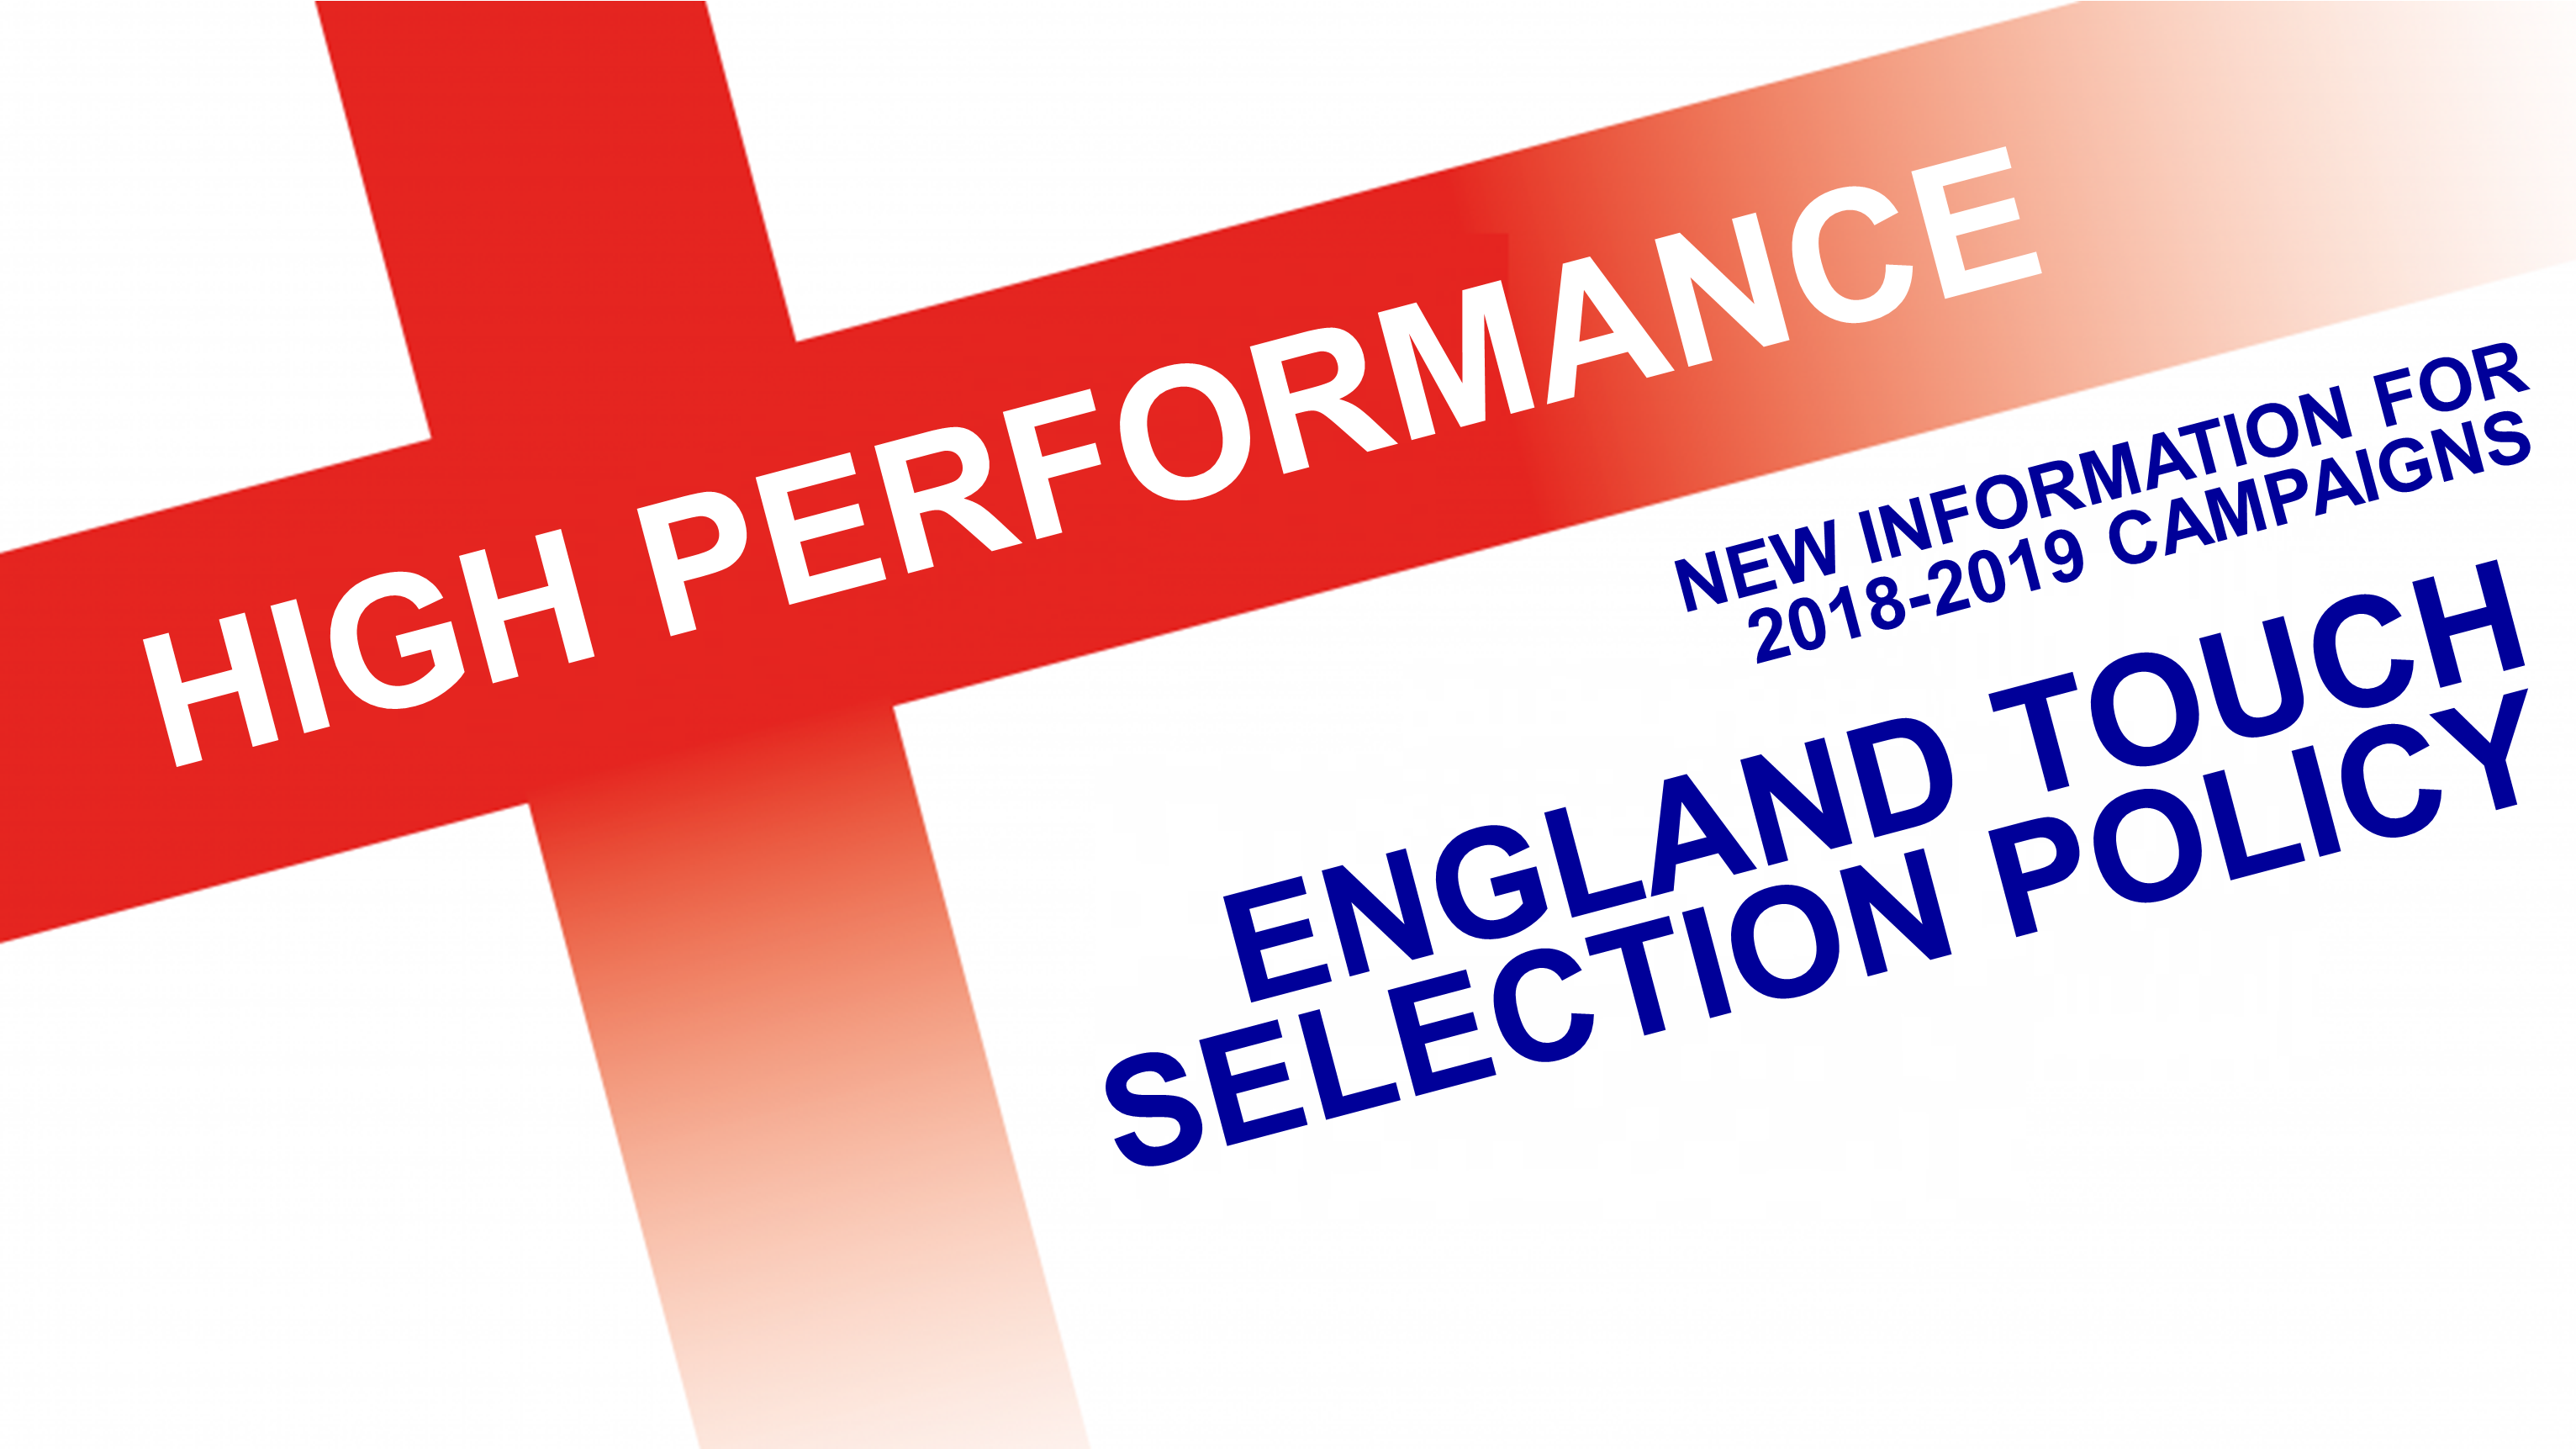 High Performance Selection Policy